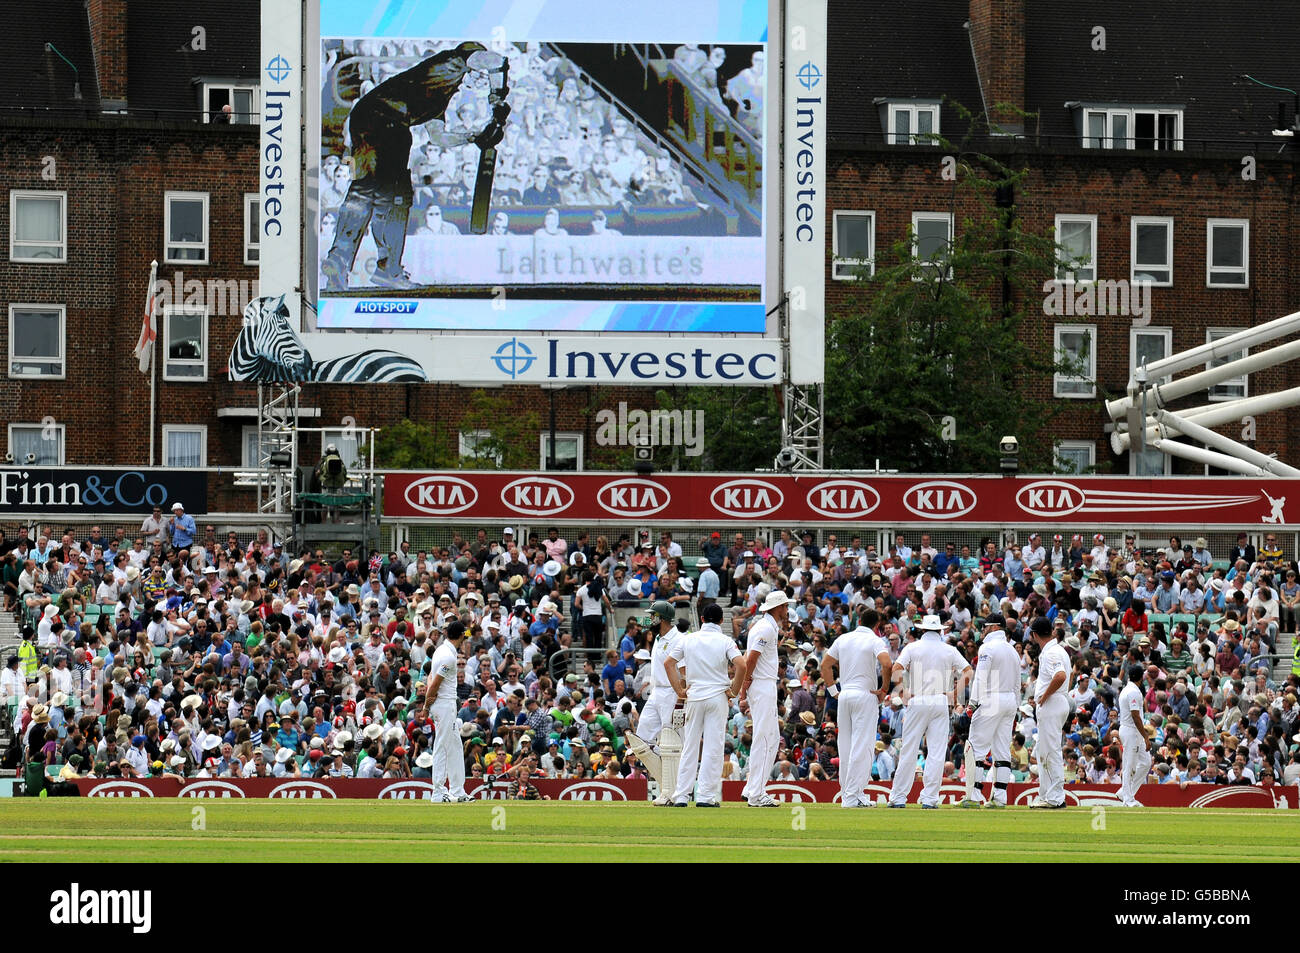 England players watch a 'hot-spot' review on the giant screen Stock Photo